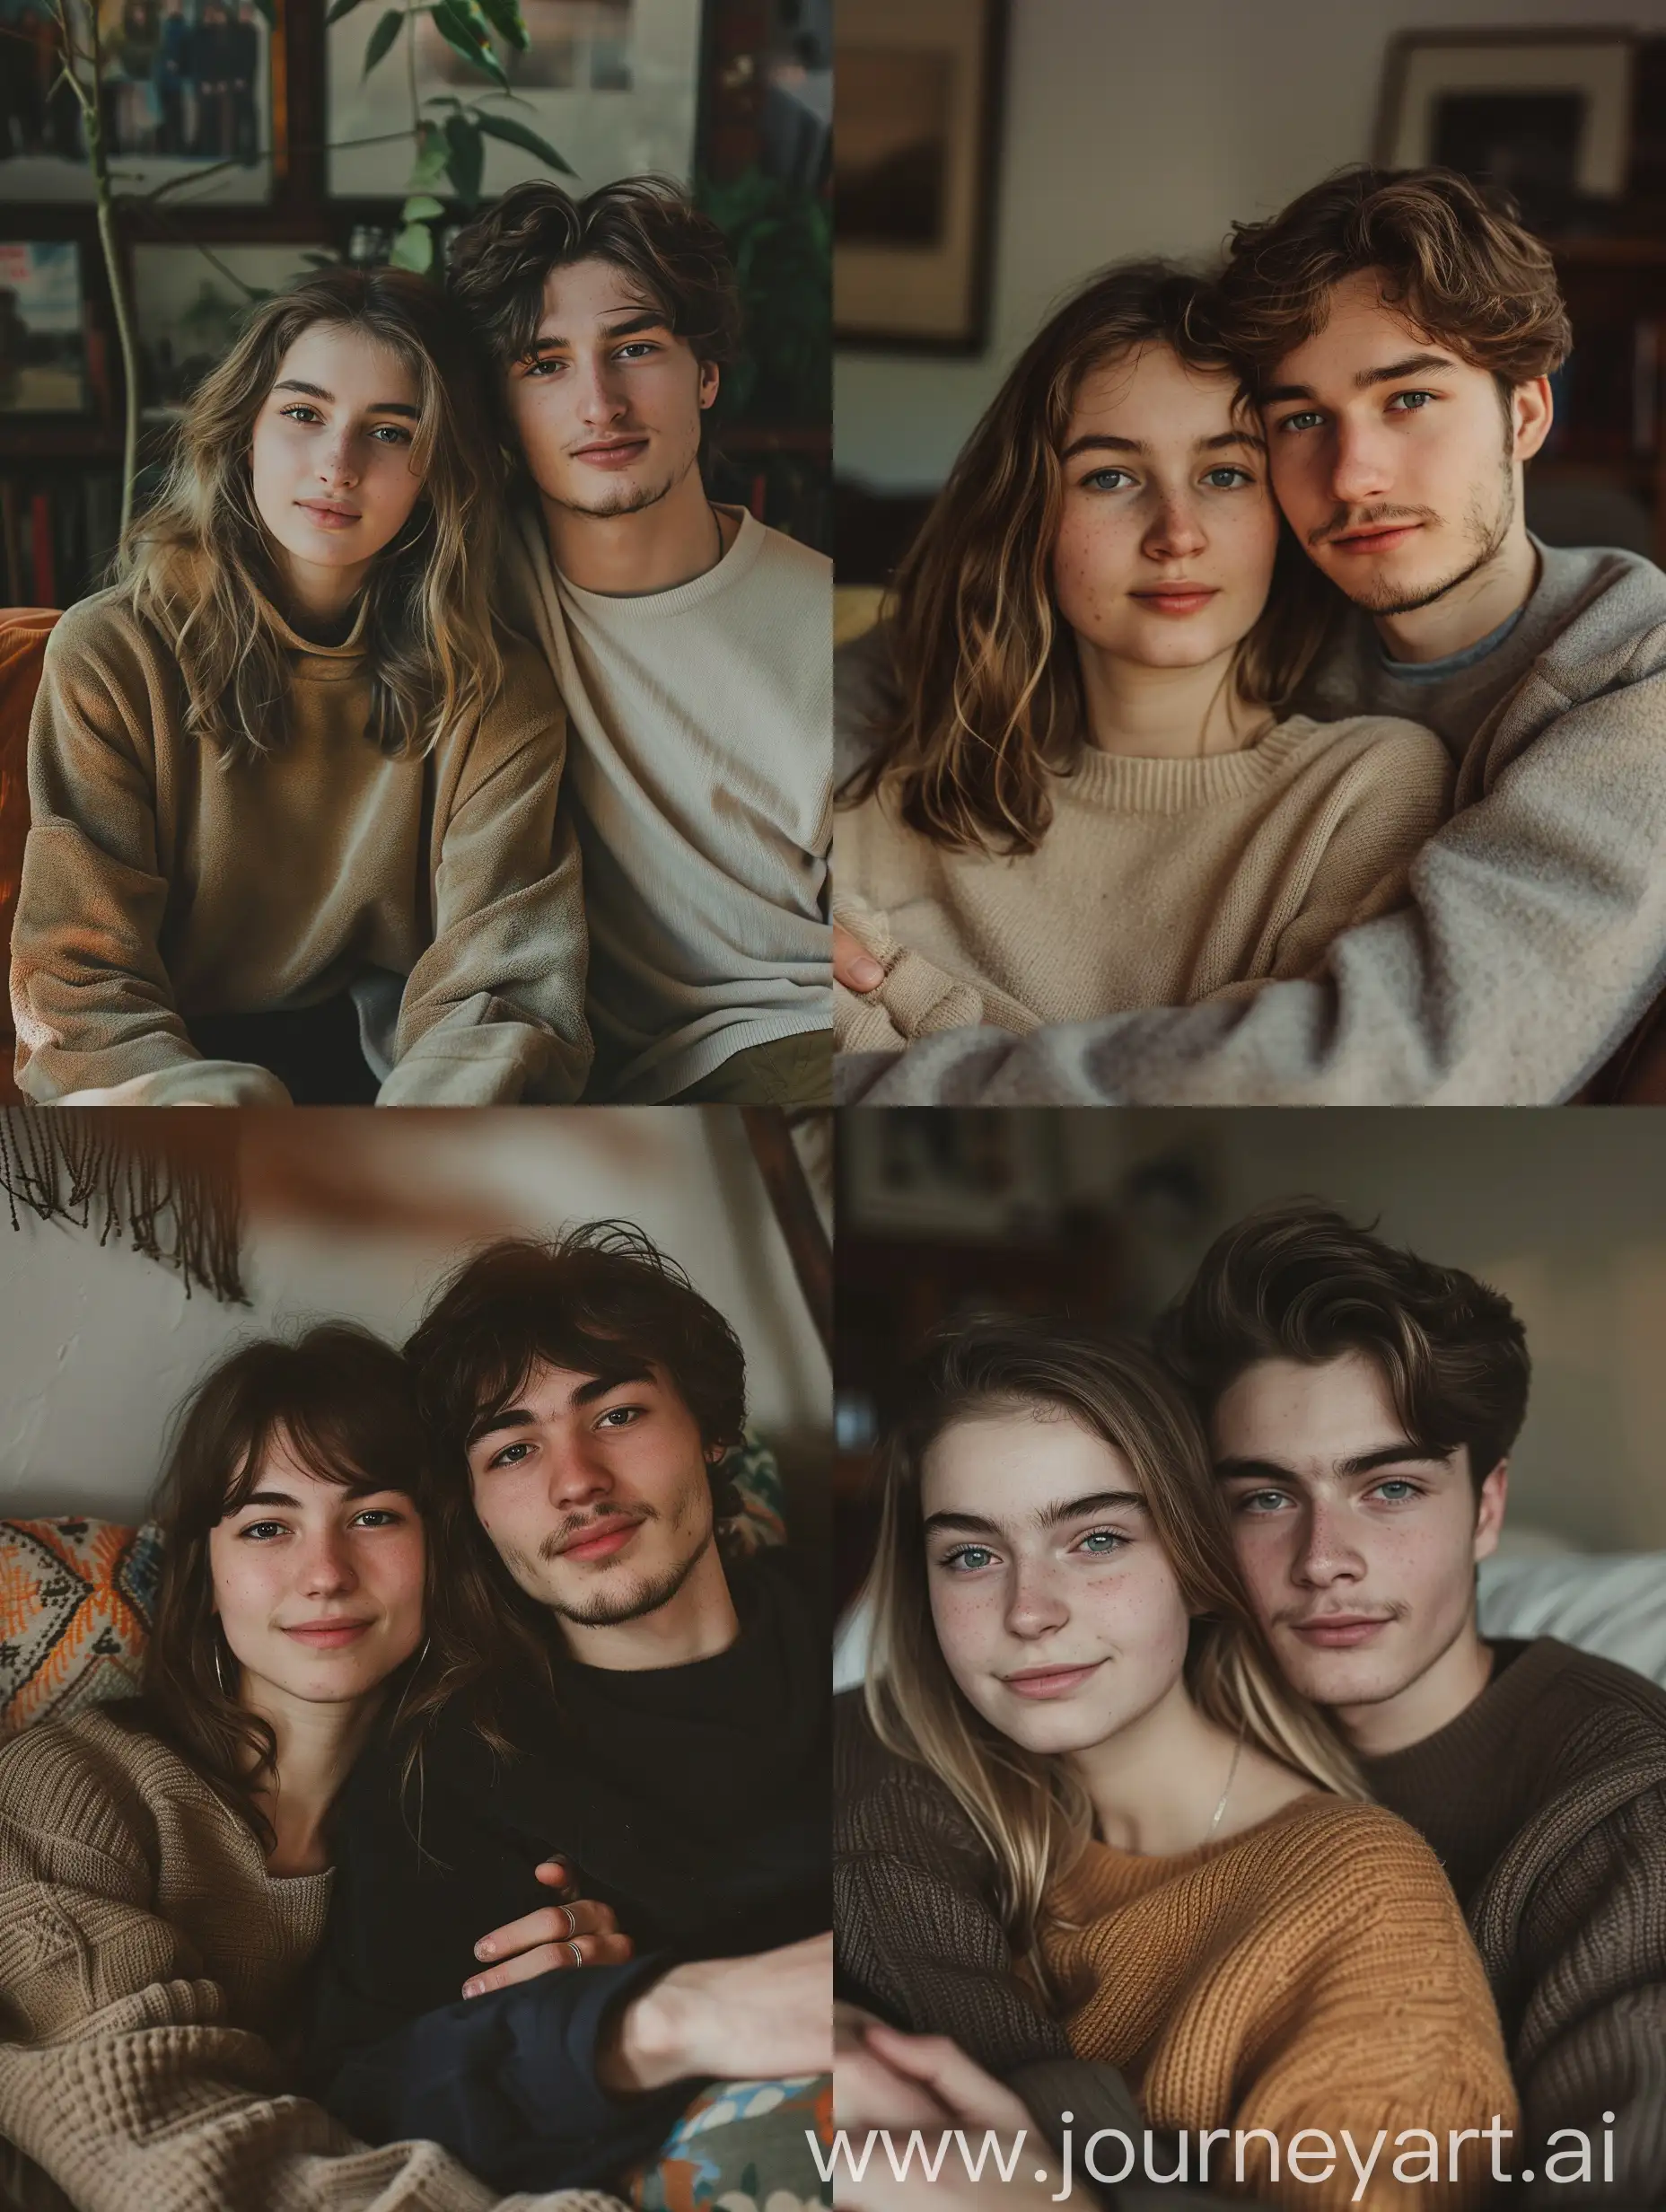 Loving couple young woman and man sitting on a sofa in a cozy atmosphere faces clearly visible and looking at the camera natural pose realistic photo faces relaxed with a slight smile high quality photo 